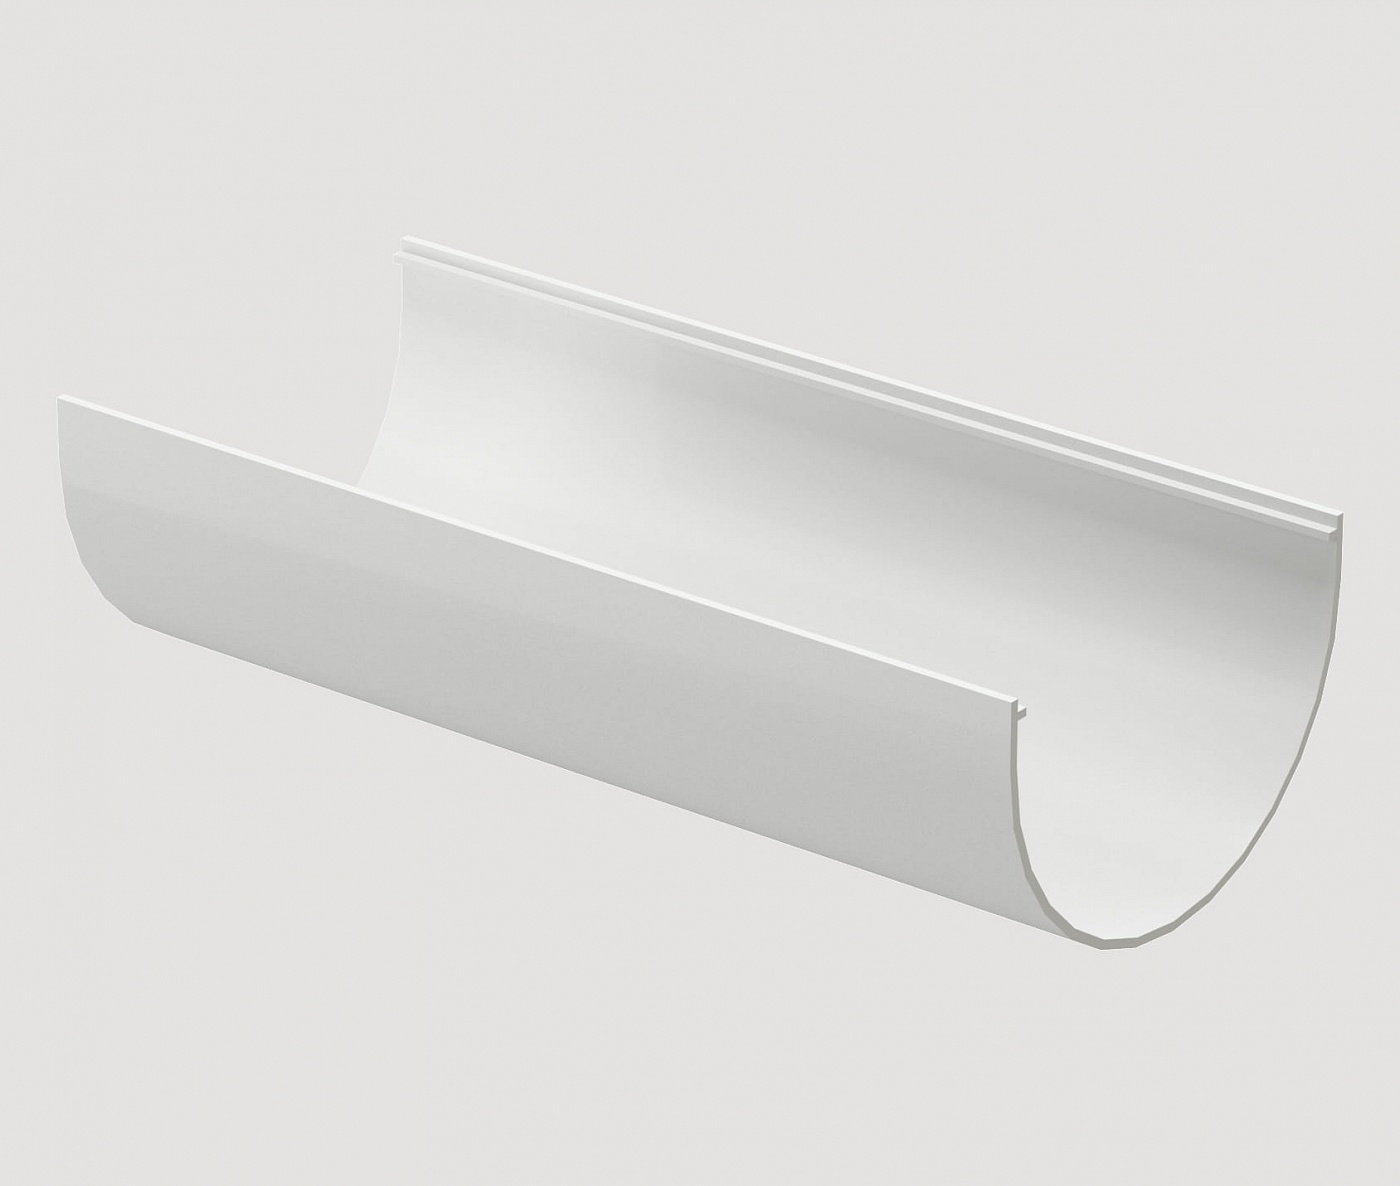 Водостоки - STANDARD SERIES White RAL 9003 - Elements of the drainage system - Gutter 3m